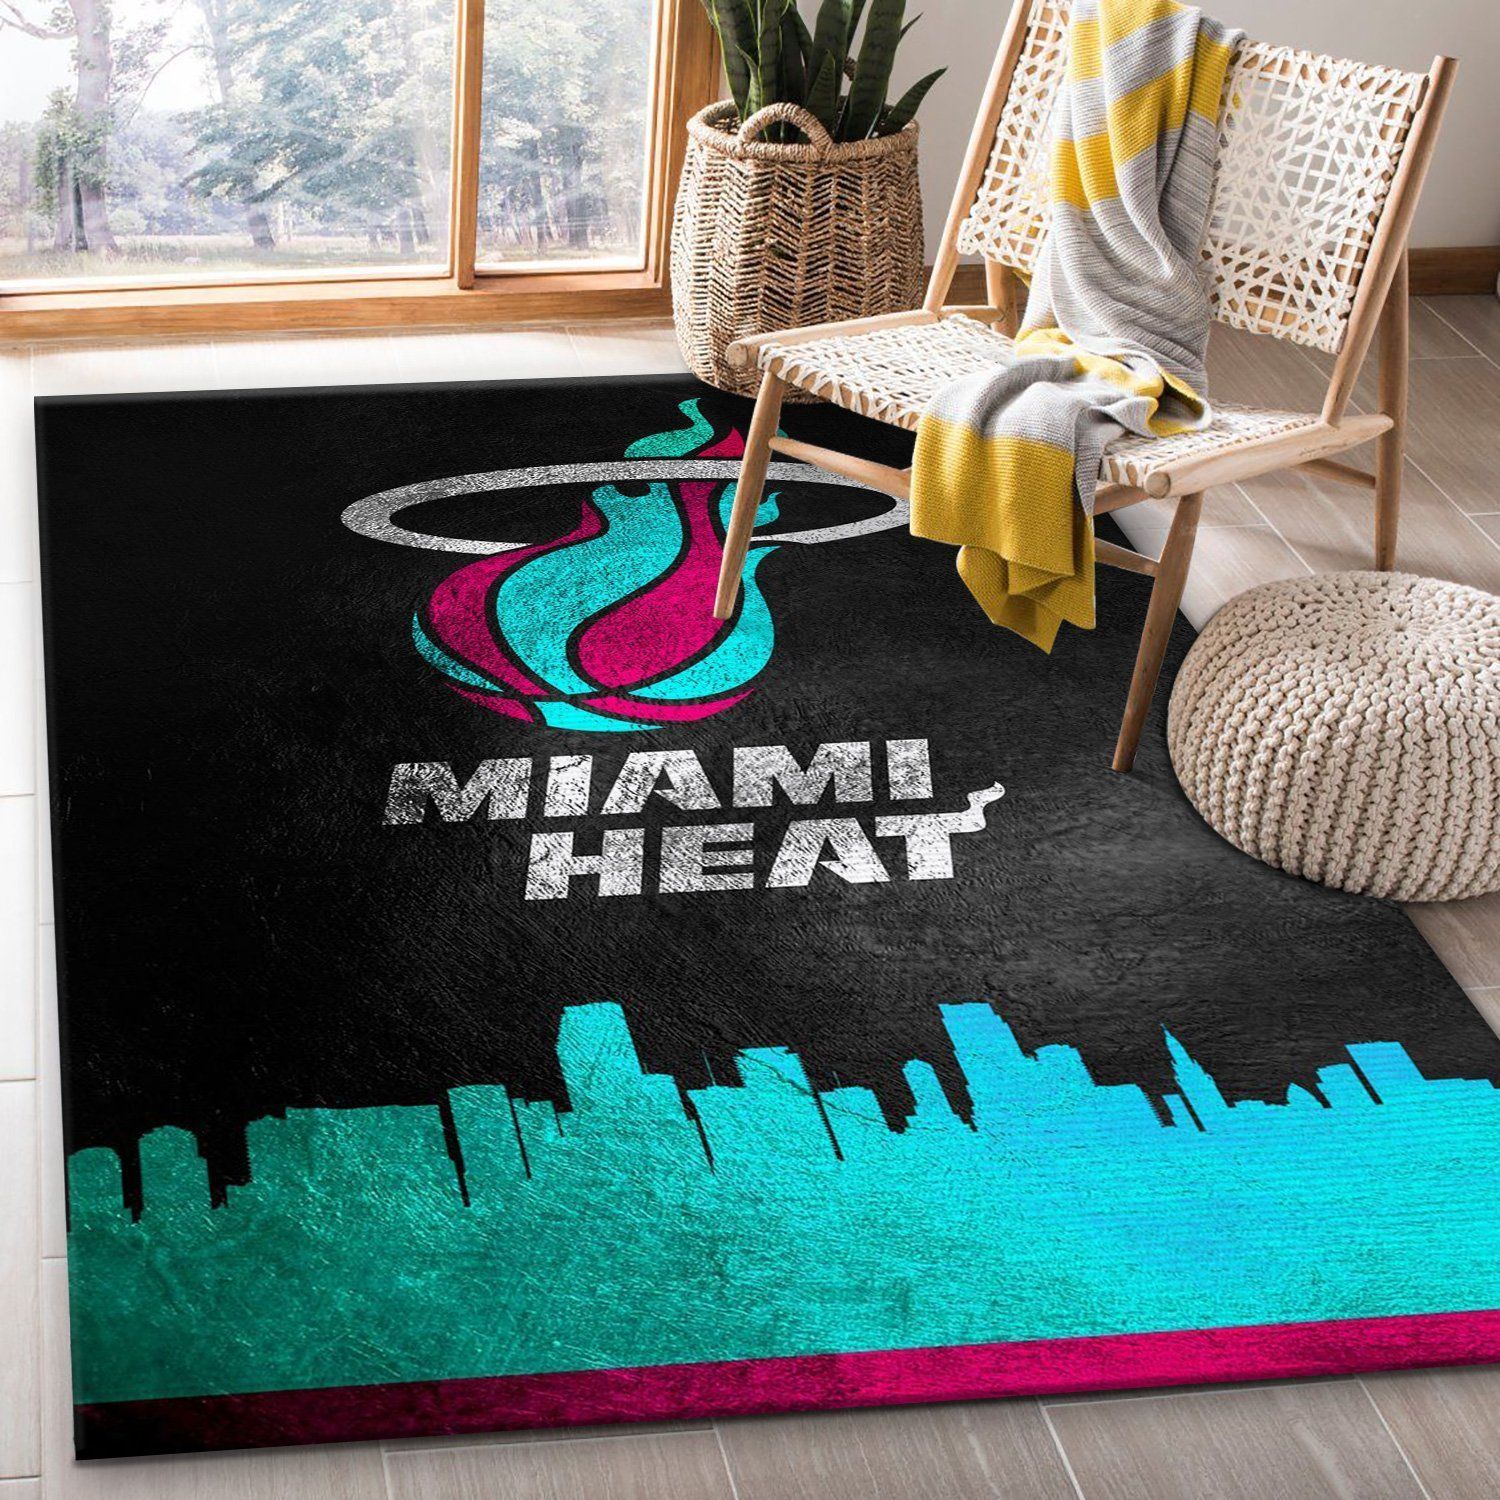 Miami Heat Vice Skyline 2 Area Rug For Christmas, Kitchen Rug, Christmas Gift US Decor – Indoor Outdoor Rugs